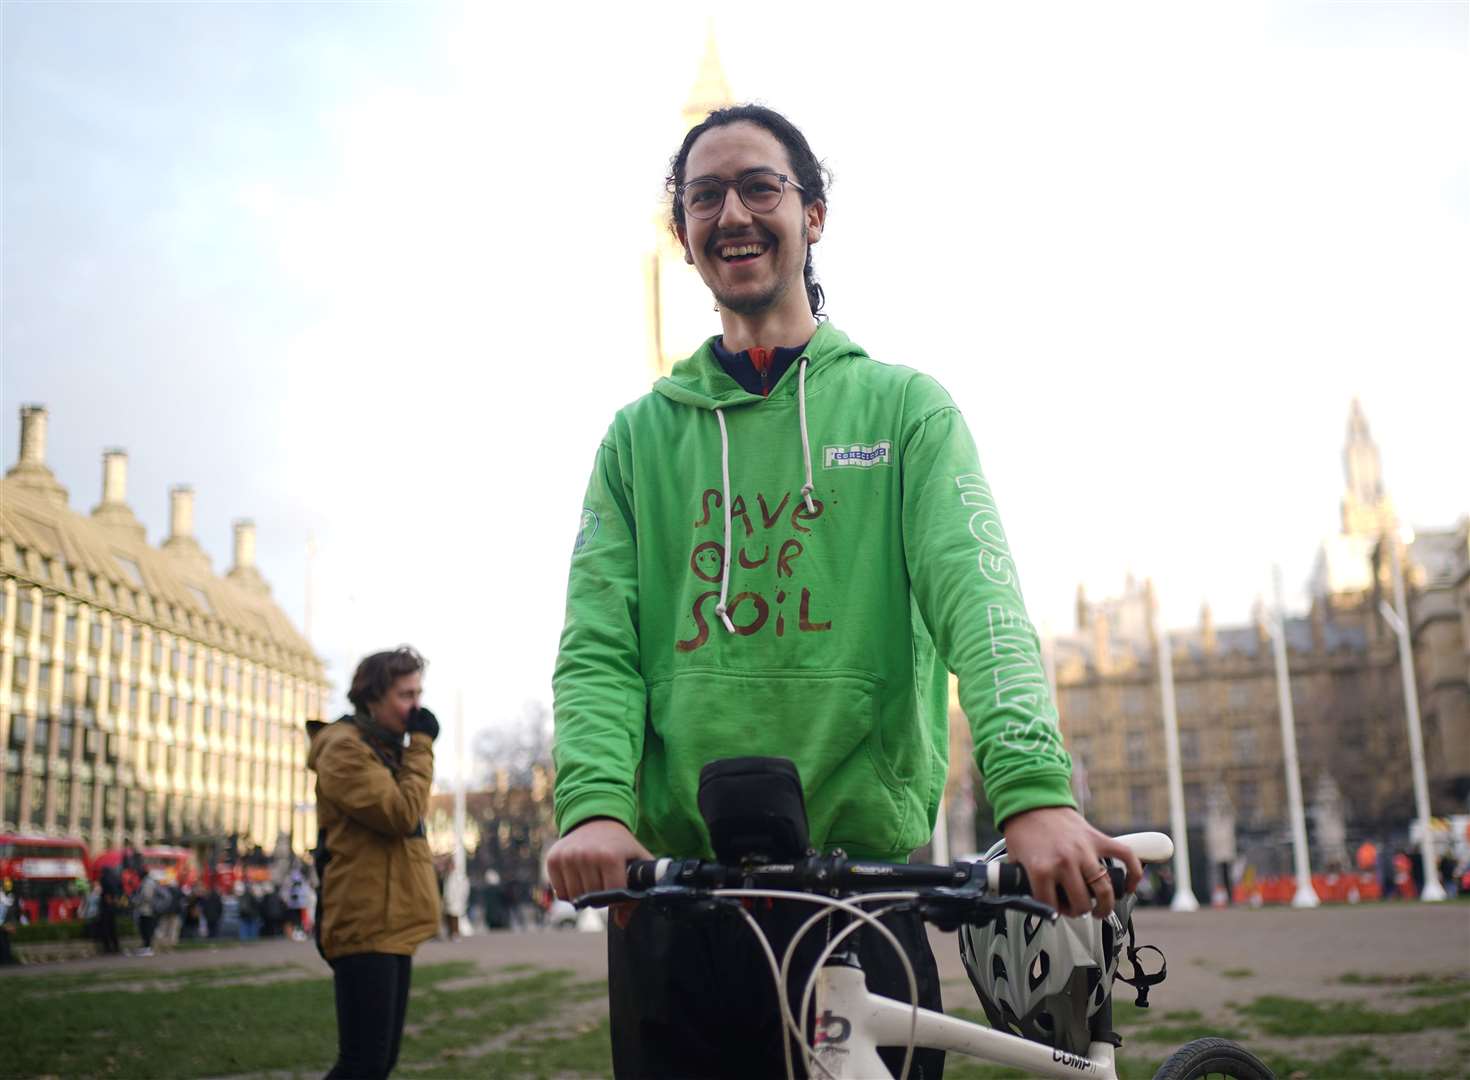 Oscar Smith, 17, cycled 900 miles across the UK and Ireland for Save Soil (Yui Mok/PA)